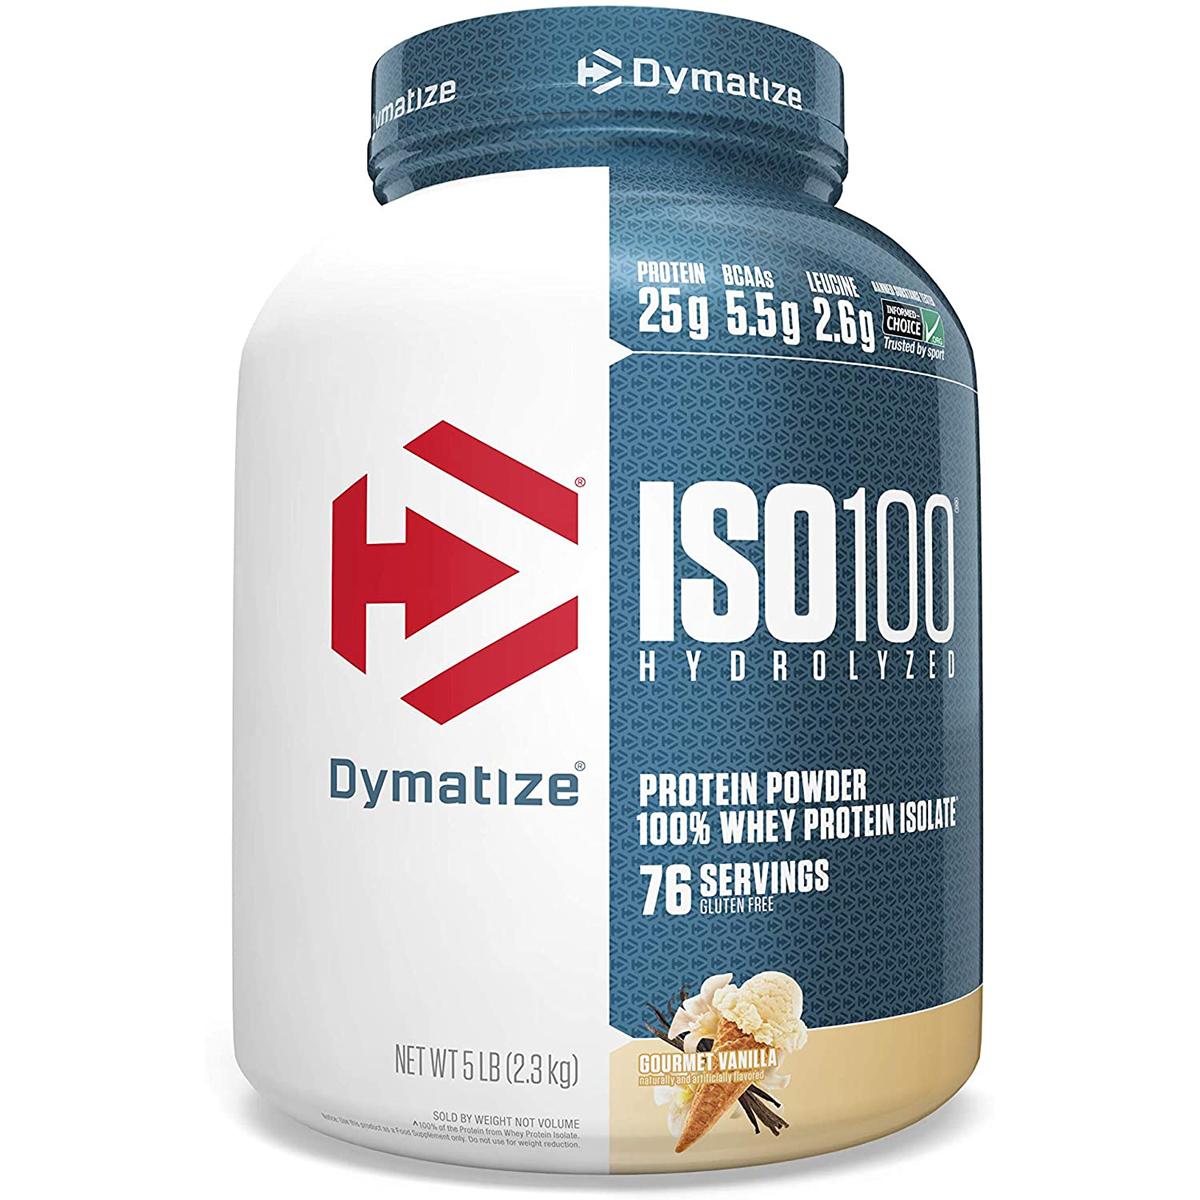 10lbs Dymatize ISO100 Hydrolyzed Whey Isolate Protein Powder for $73.53 Shipped